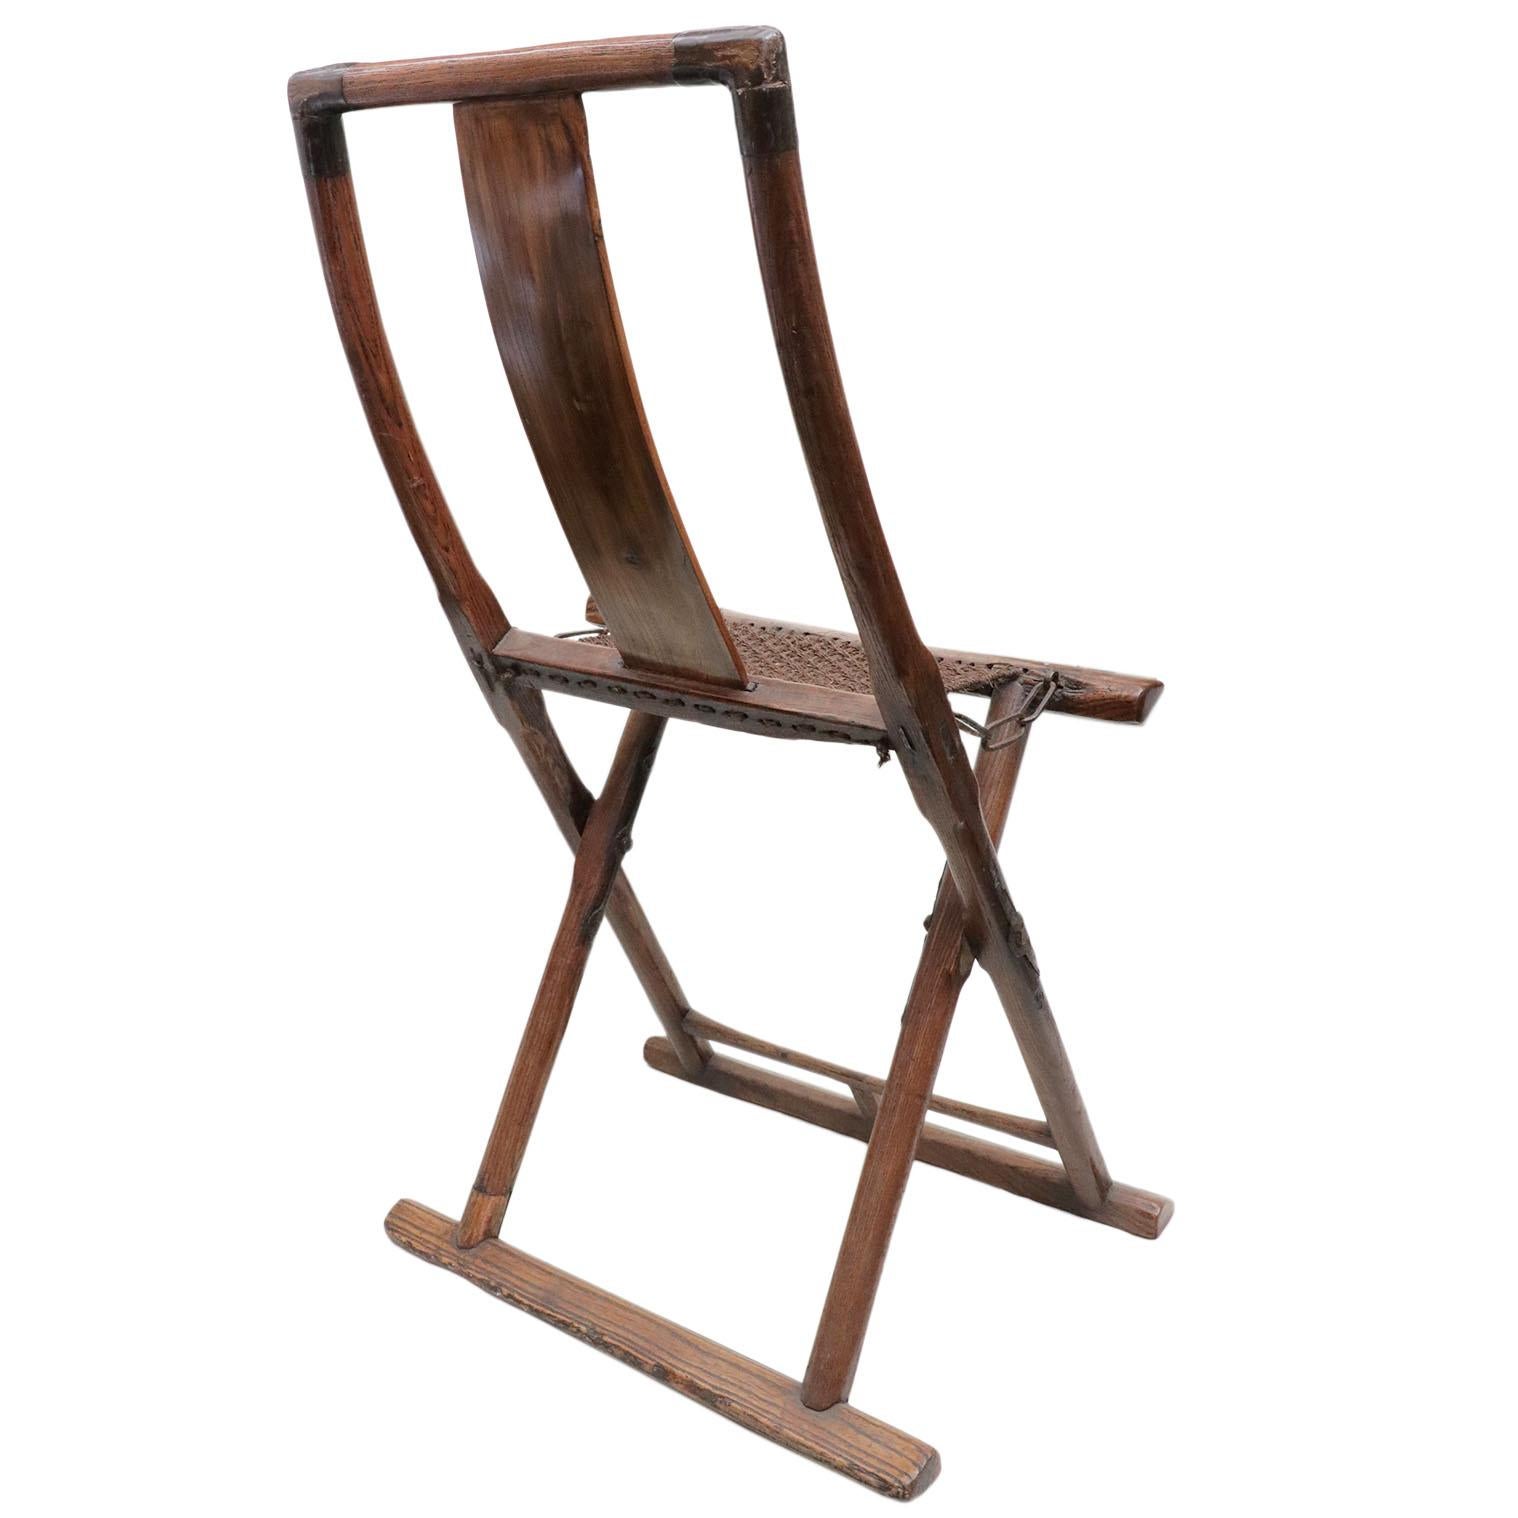 Chinese Wooden Folding Chair In Good Condition For Sale In San Francisco, CA